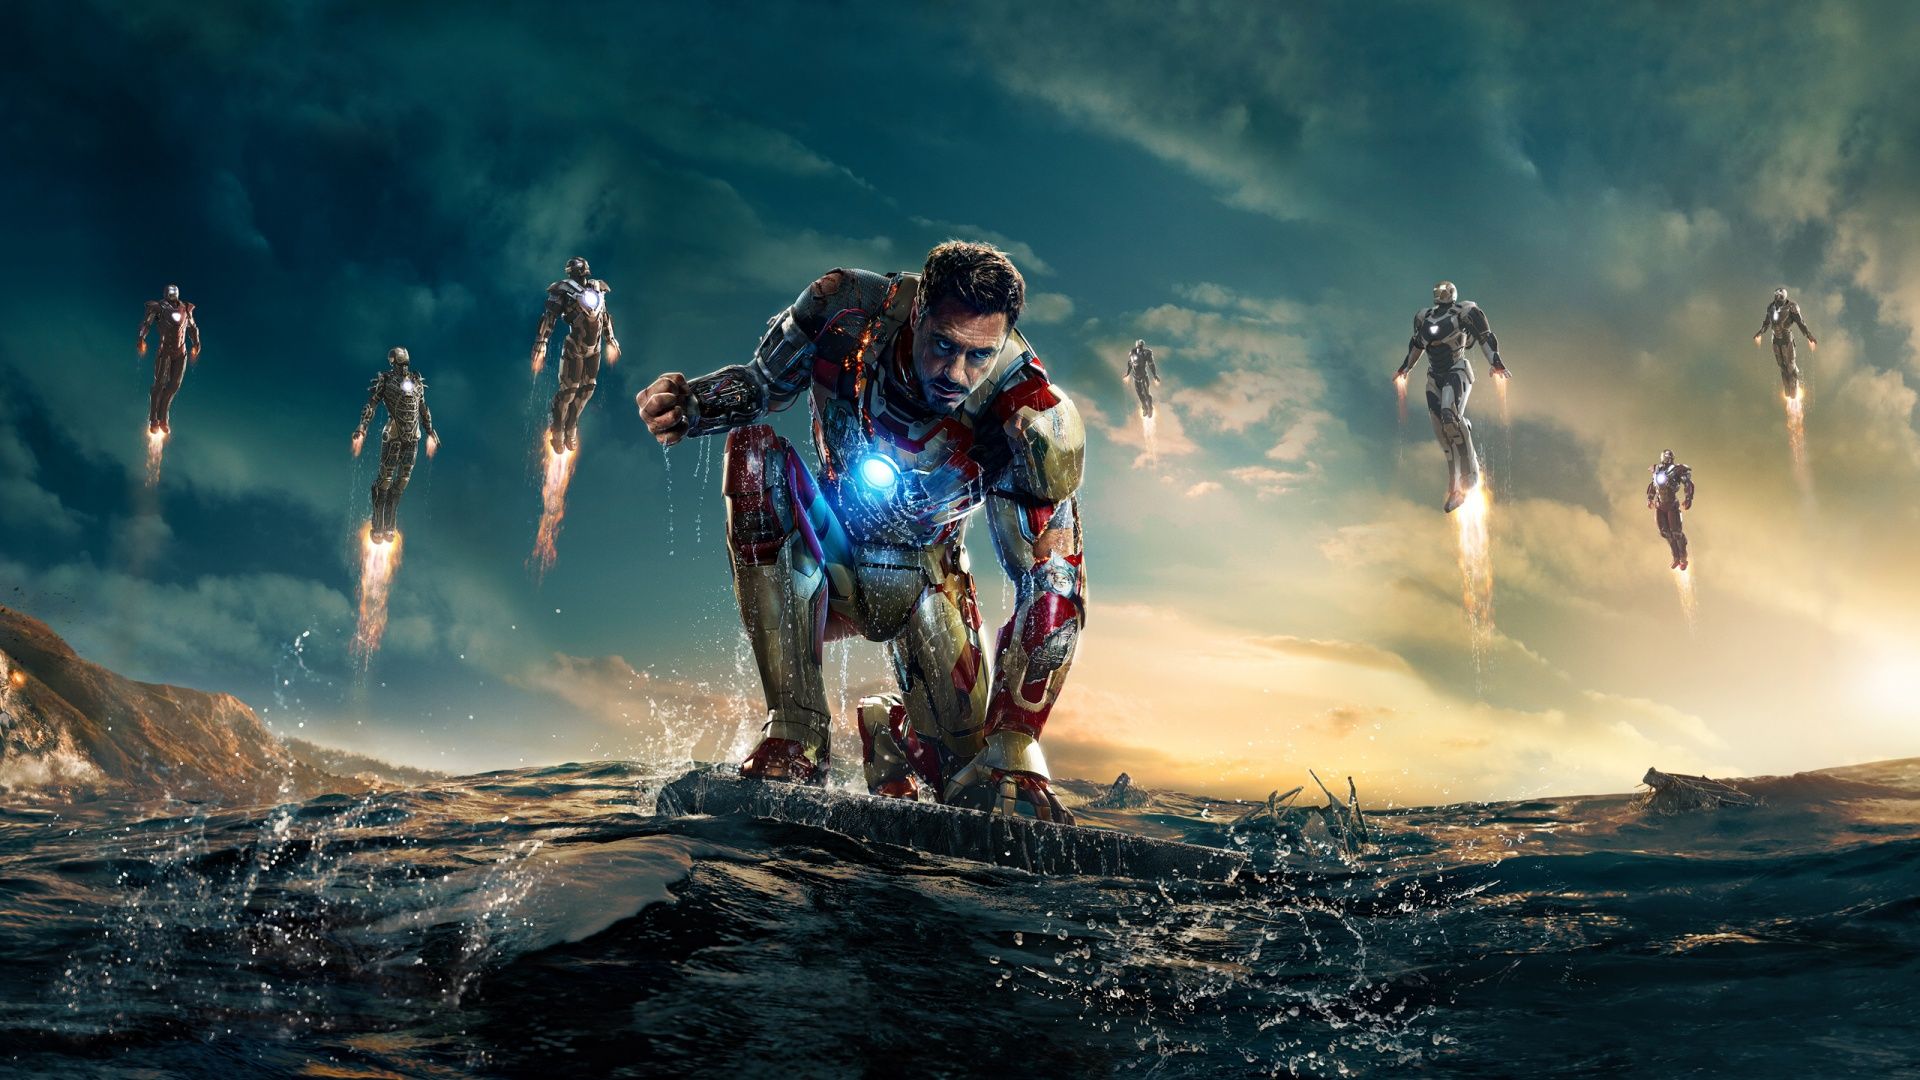 Top 10 HD Iron Man Wallpapers for iPhone 5 / 5s